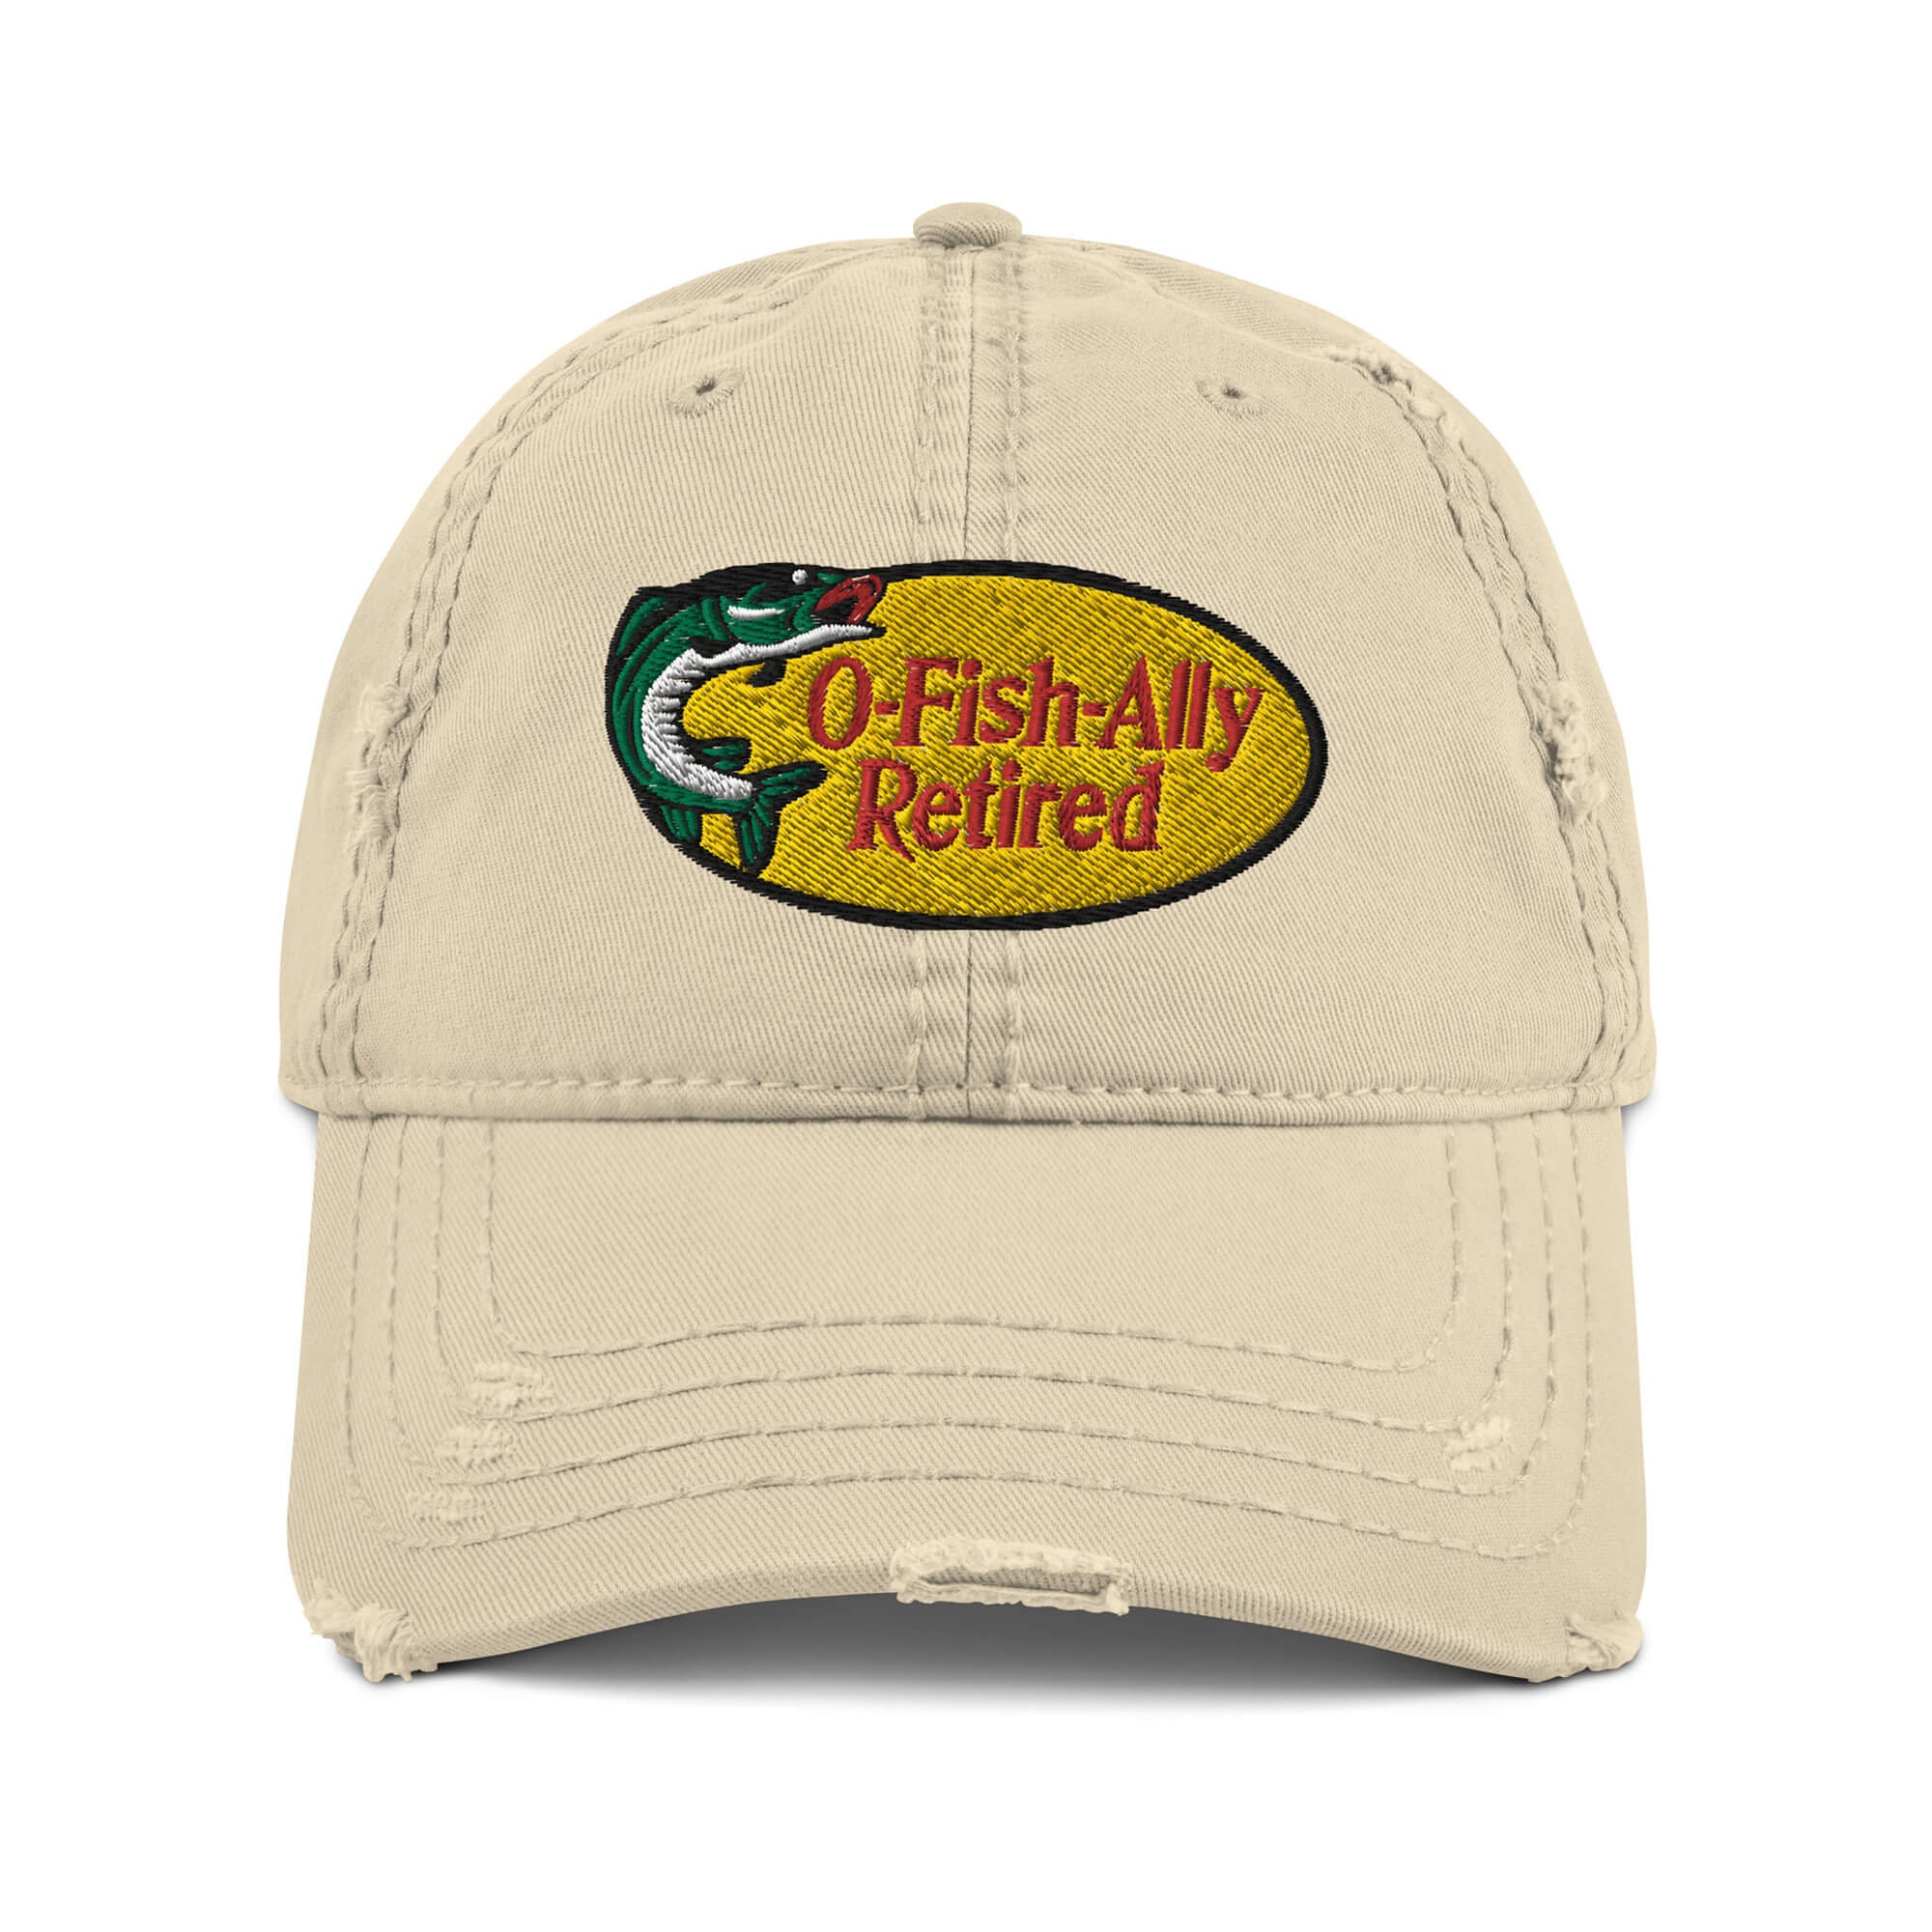 WITHMOONS Cotton Fishing Hat Fish Bone Embroidery Trucker Dad Baseball Cap  YZ10119 (Beige) 